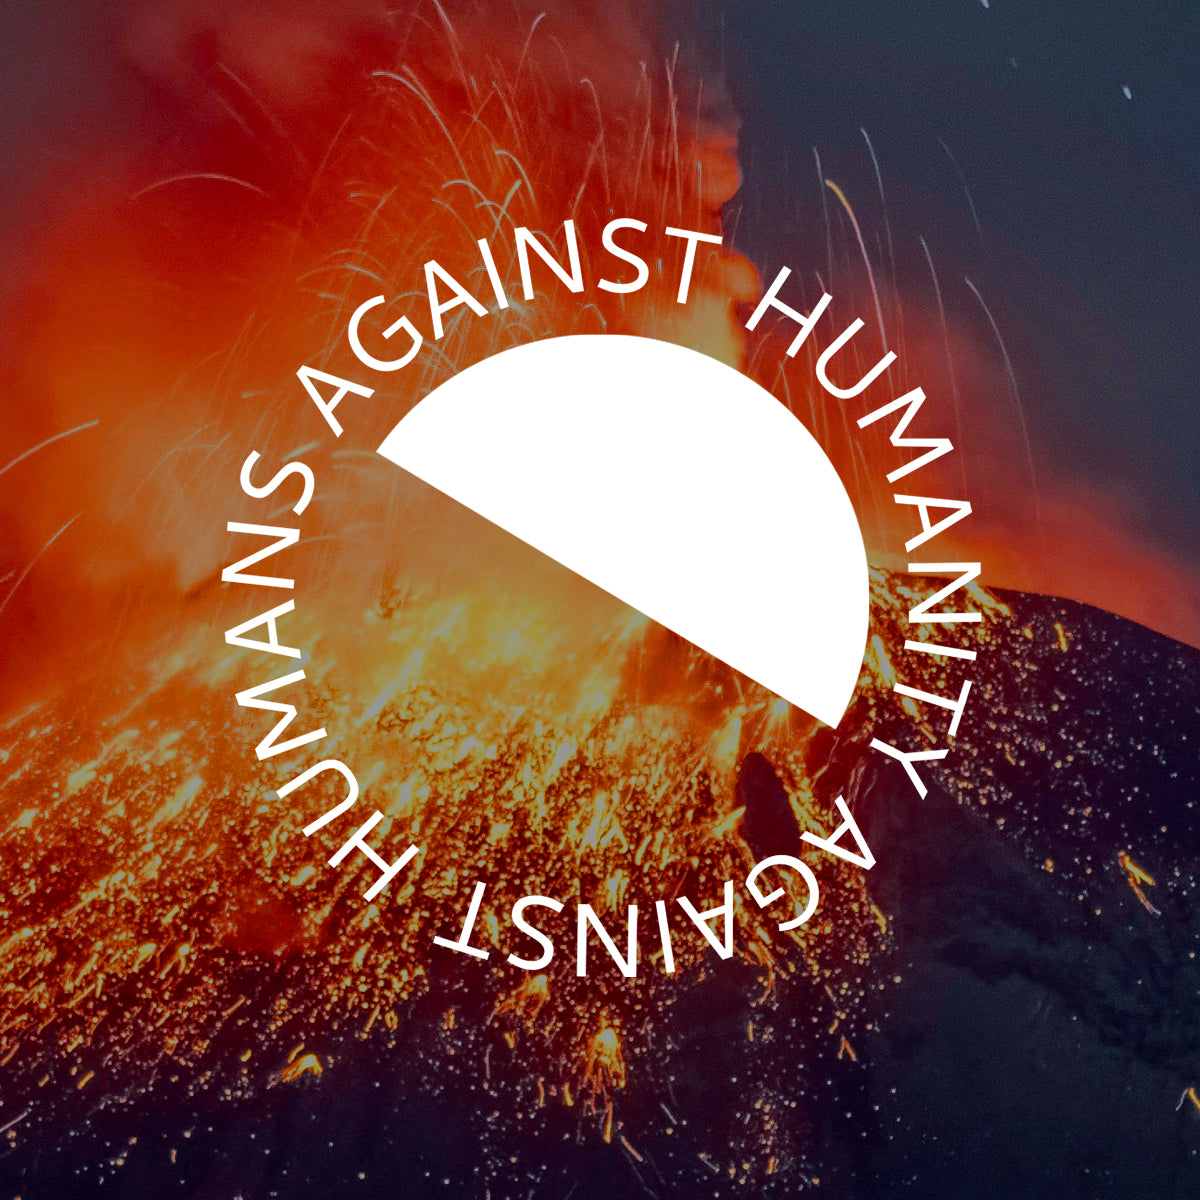 Humans Against Humanity - Rex sweater